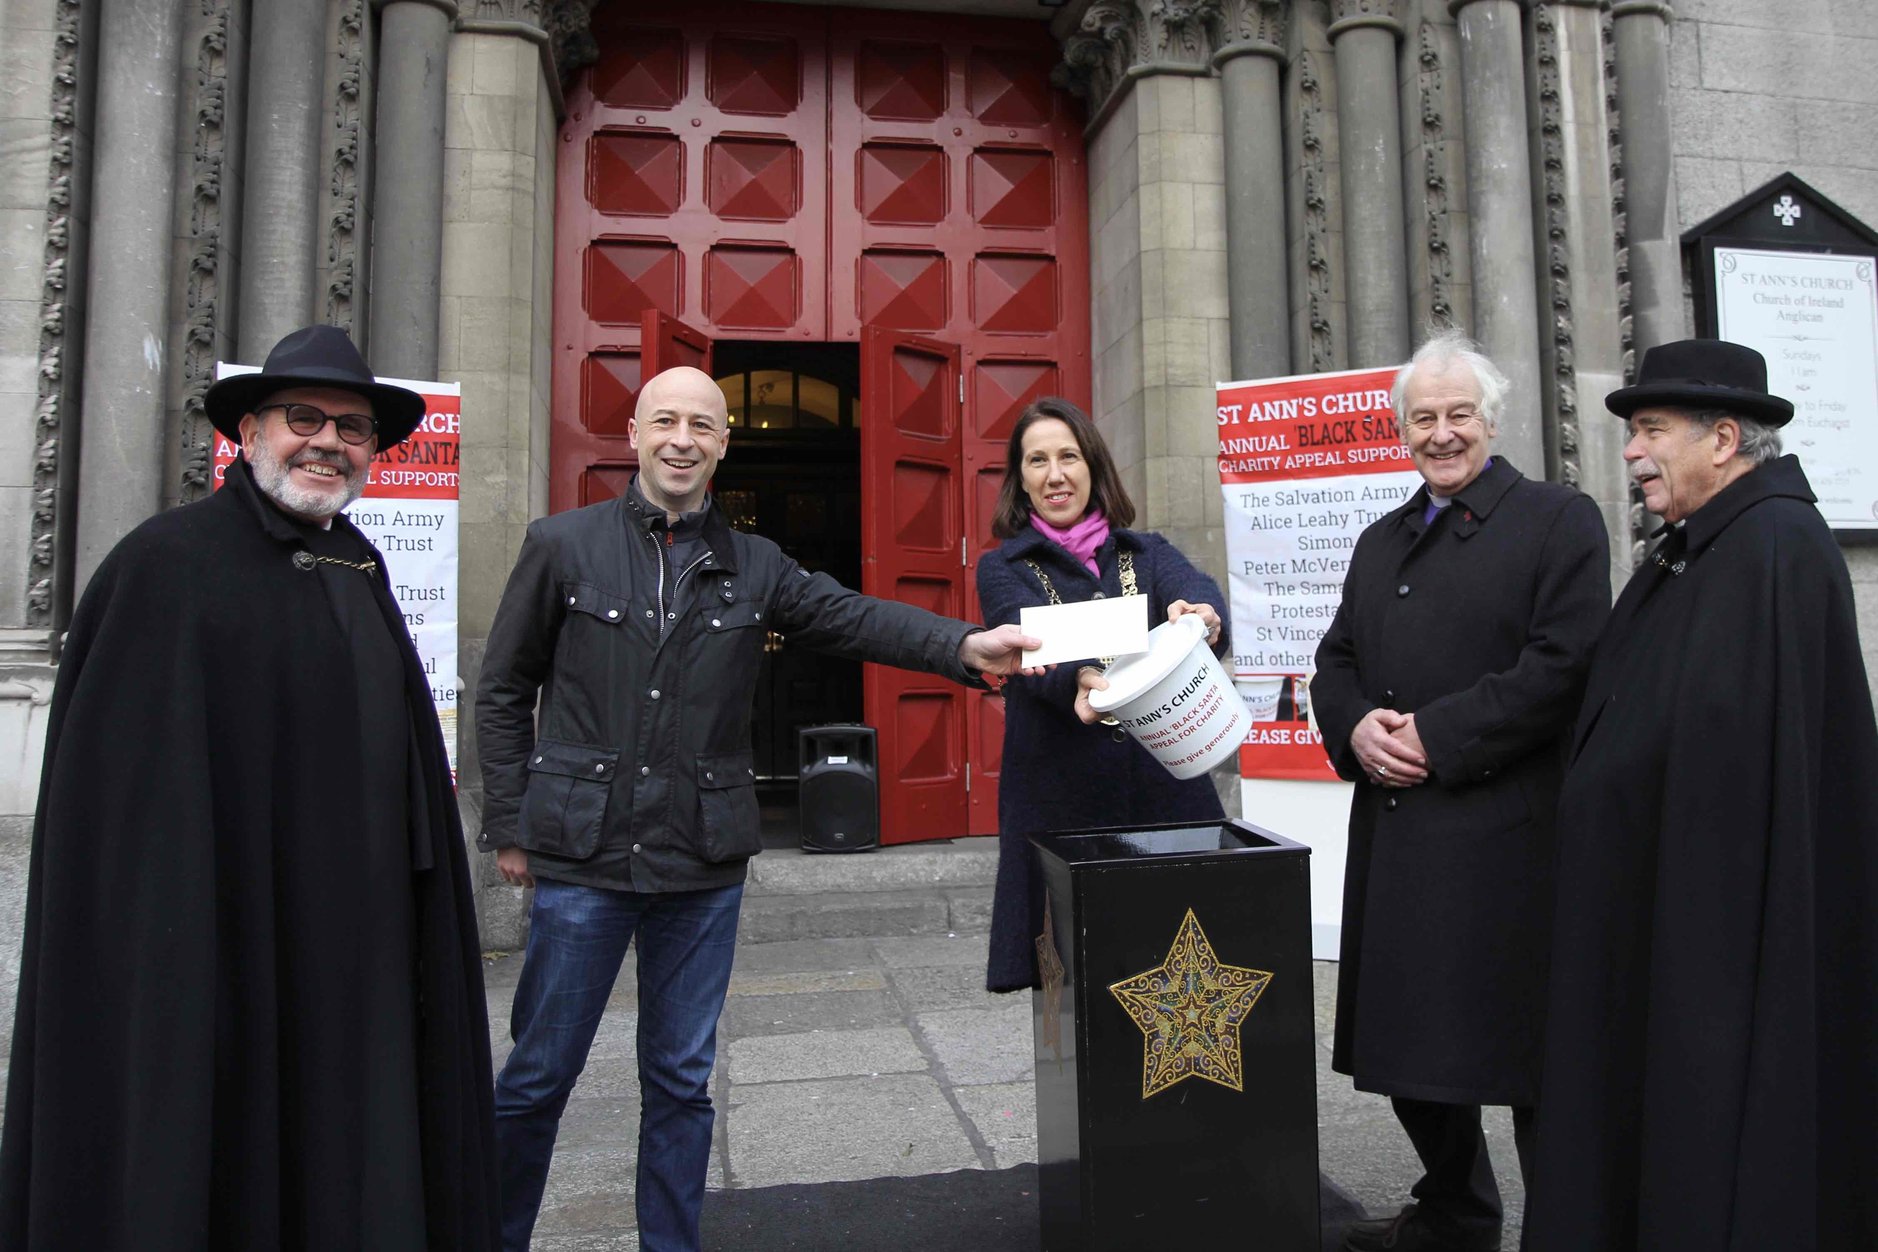 At the launch of the Black Santa Sit Out 2021 at St Ann's Dawson Street were Fred Deane, Derek Scully of Energia, Lord Mayor Allison Gilliland, Archbishop Michael Jackson and the Revd Terry Lilburn.